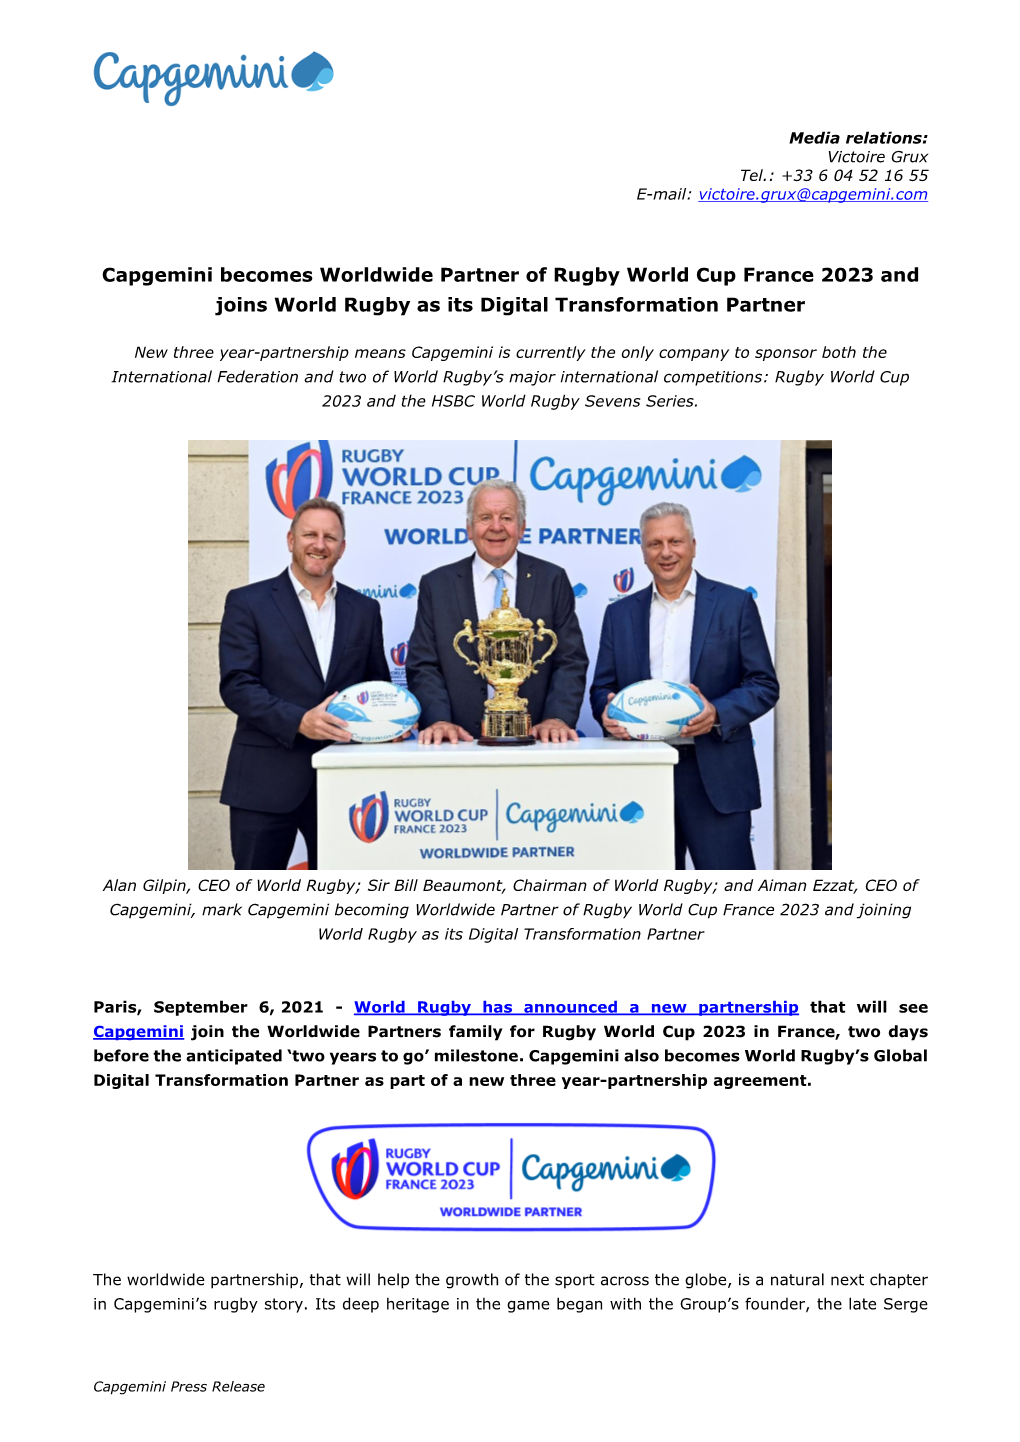 Capgemini Becomes Worldwide Partner of Rugby World Cup France 2023 and Joins World Rugby As Its Digital Transformation Partner